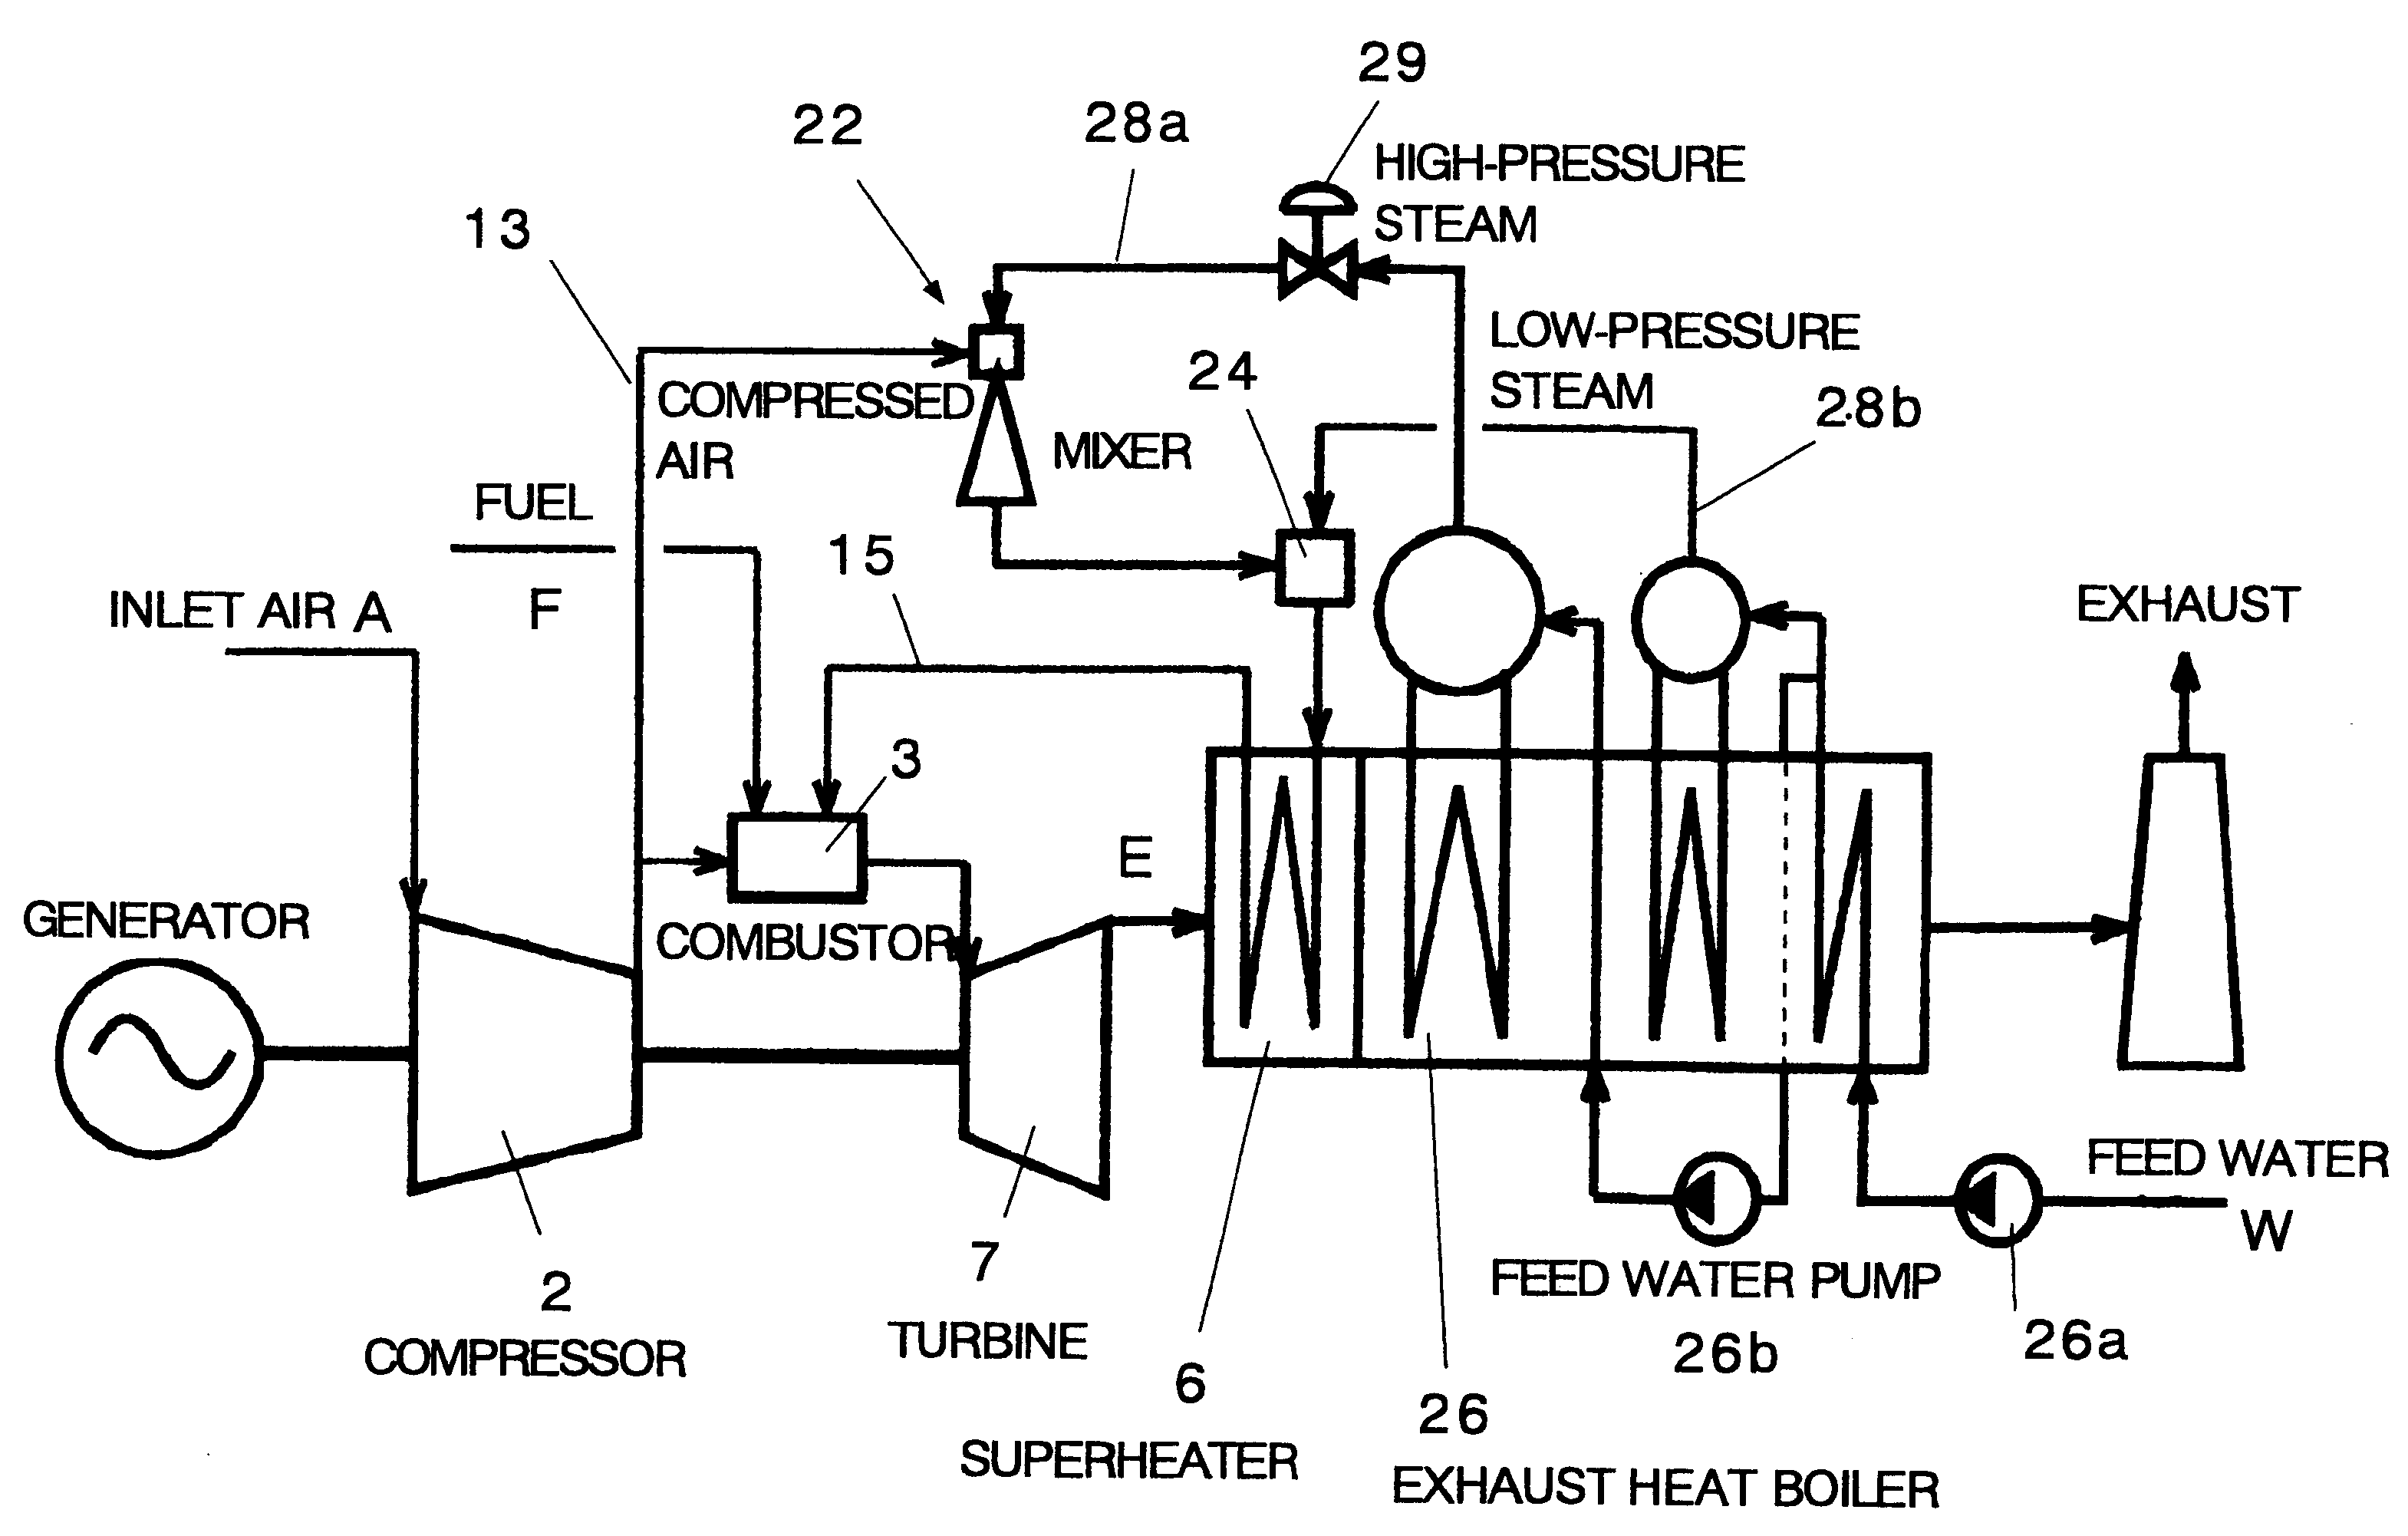 Dual-pressure steam injection partial-regeneration-cycle gas turbine system